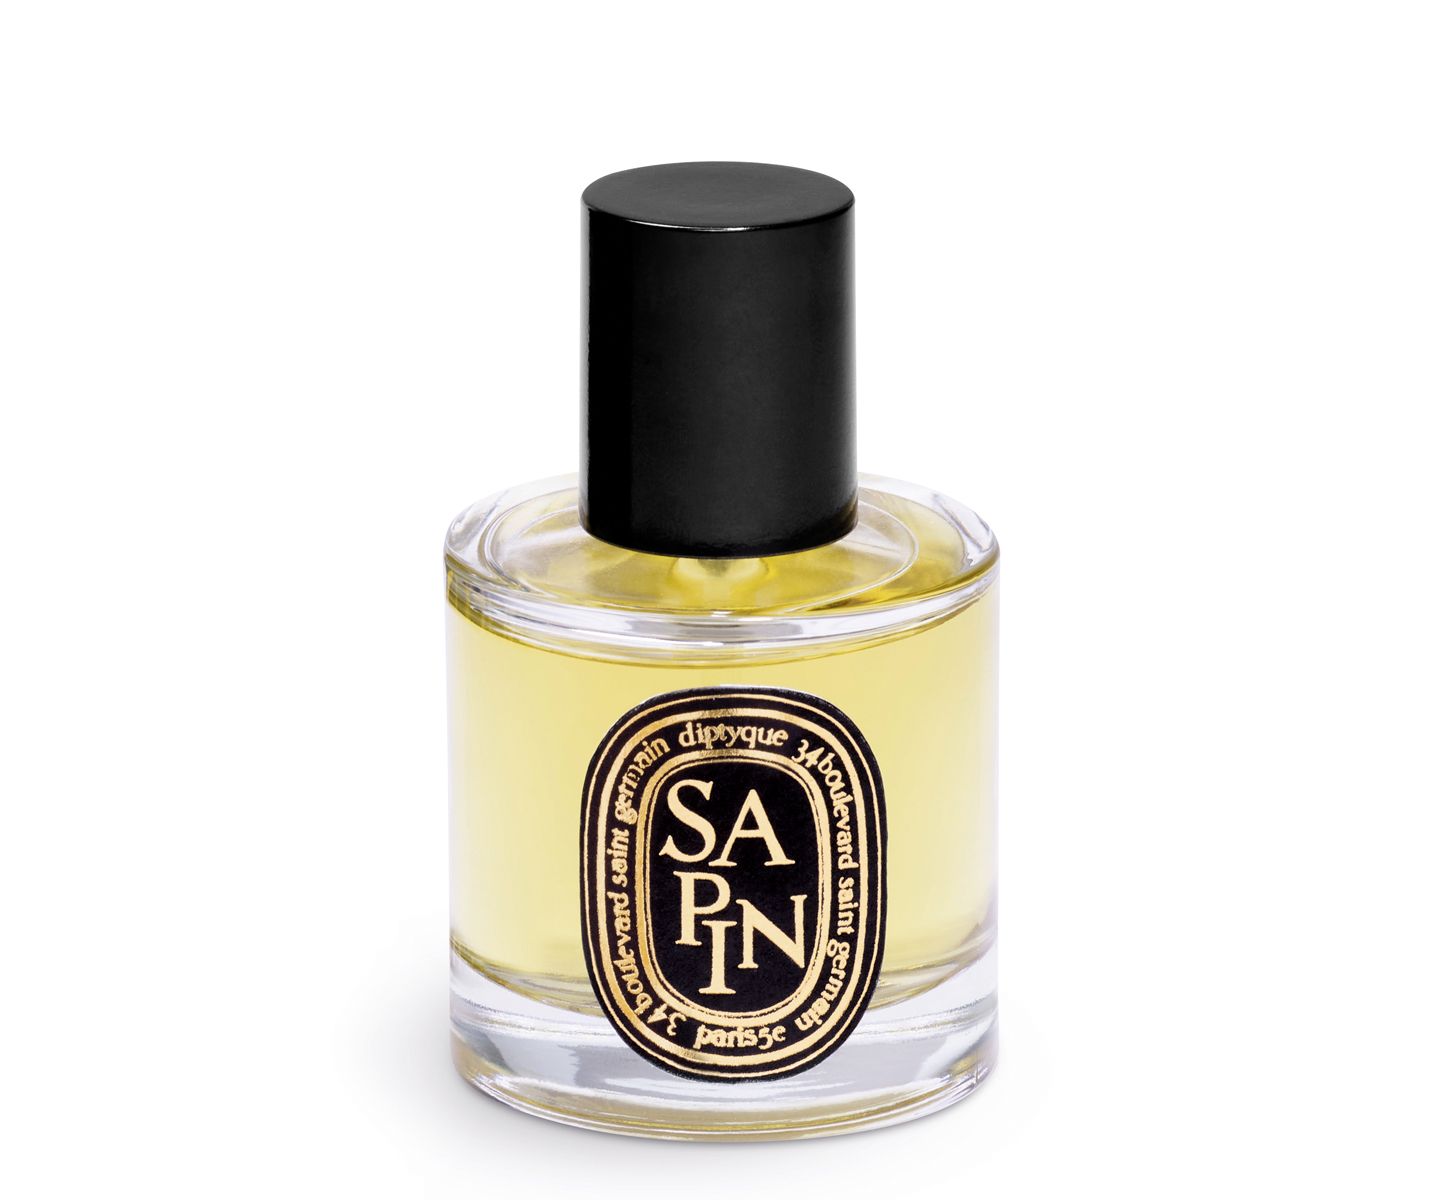 Sapin / Pine Tree room spray 50ml - Limited Edition | diptyque (US)